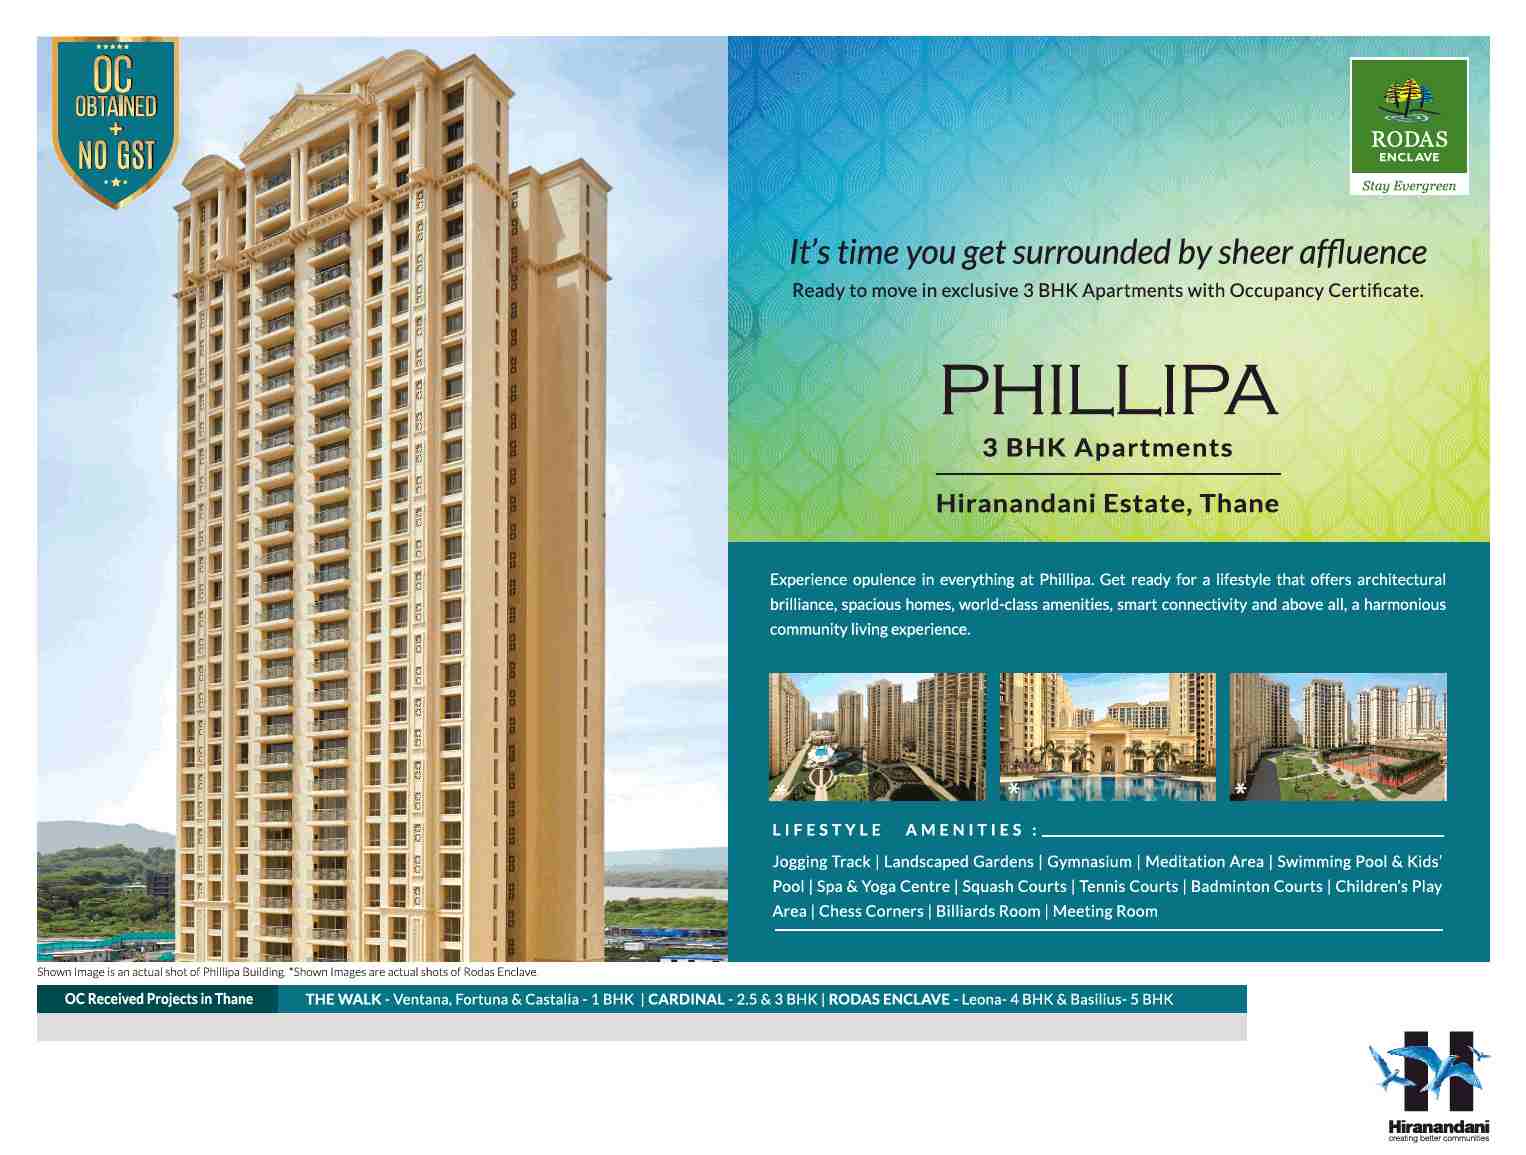 Experience opulence in everything at Hiranandani Rodas Enclave Phillipa in Mumbai